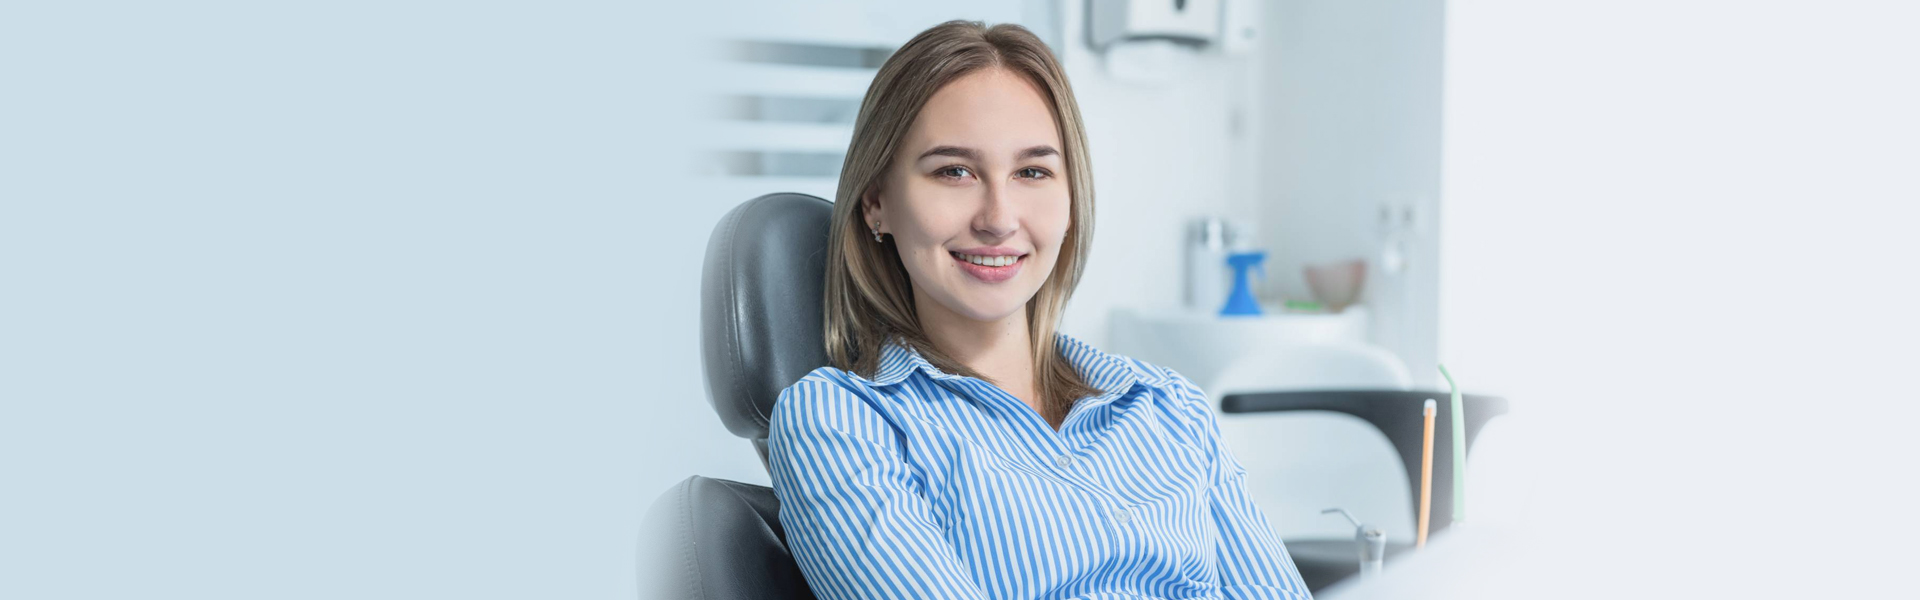 Choosing a Cosmetic Dental Office for Your Smile Makeover